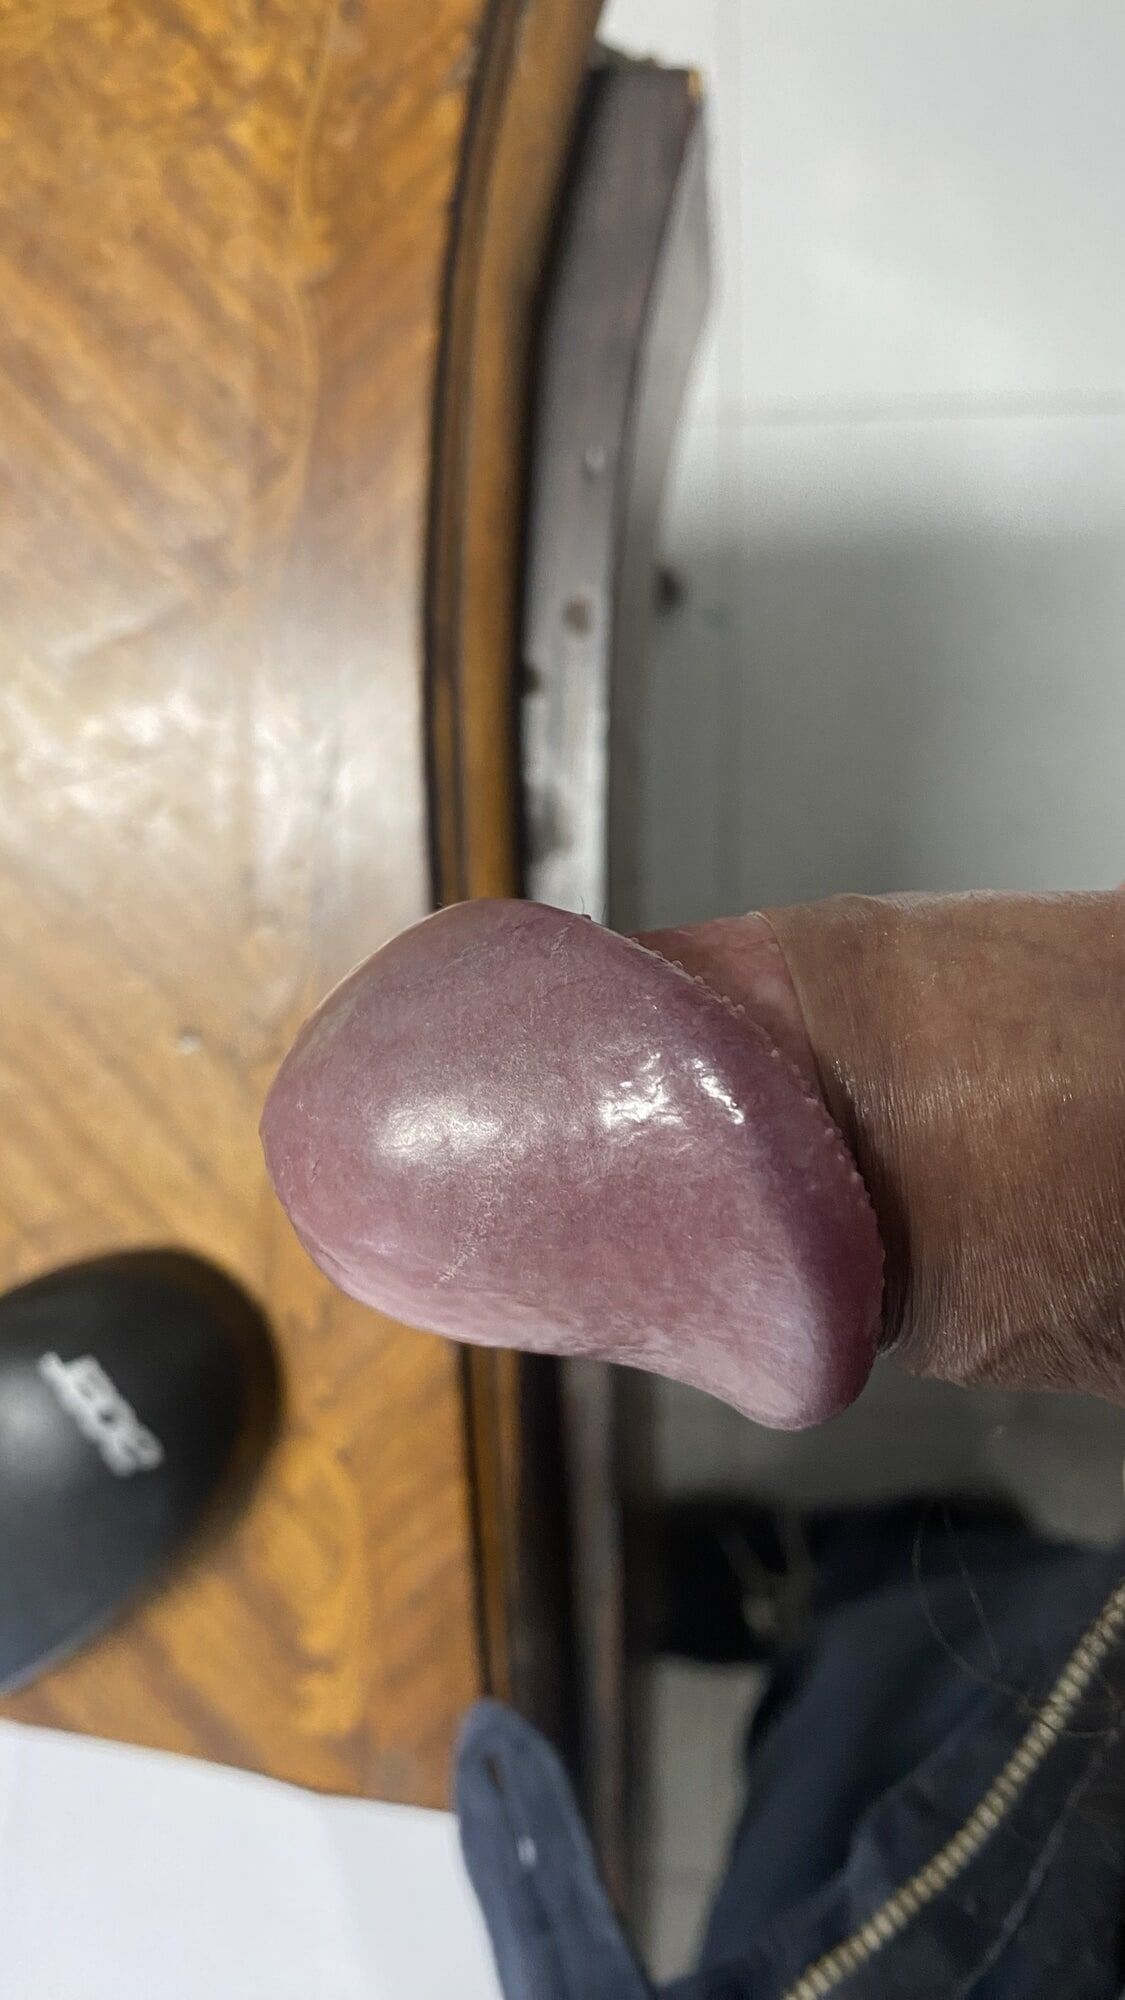 I'm looking for you to suck my cock